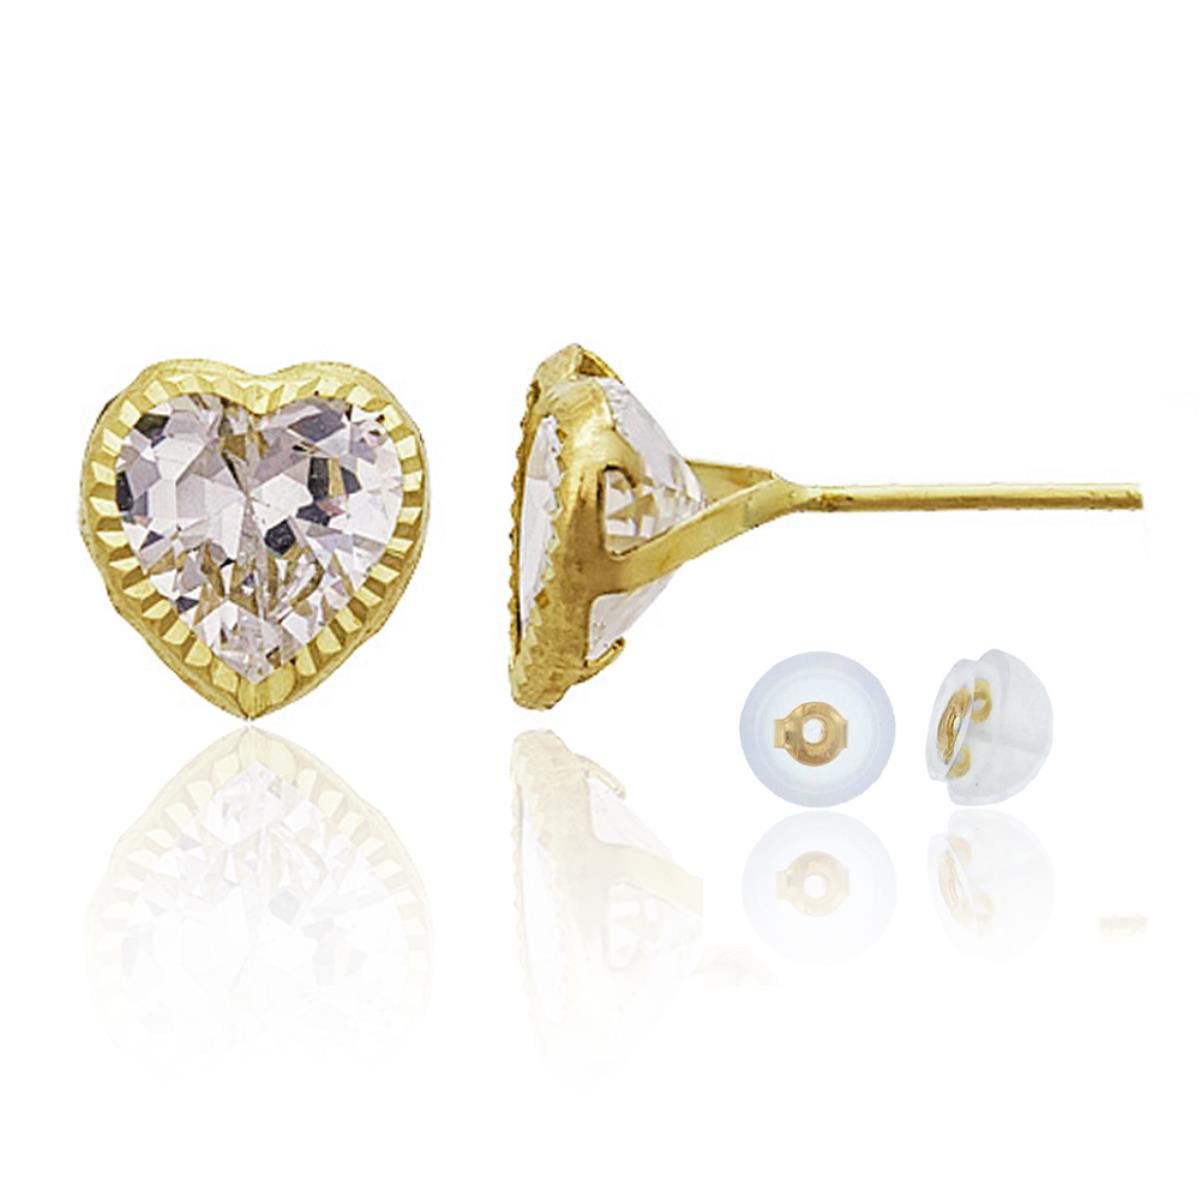 10K Yellow Gold DC Basic Heart Bezel 6x6mm Stud Earrings with Bubble Silicone Backs